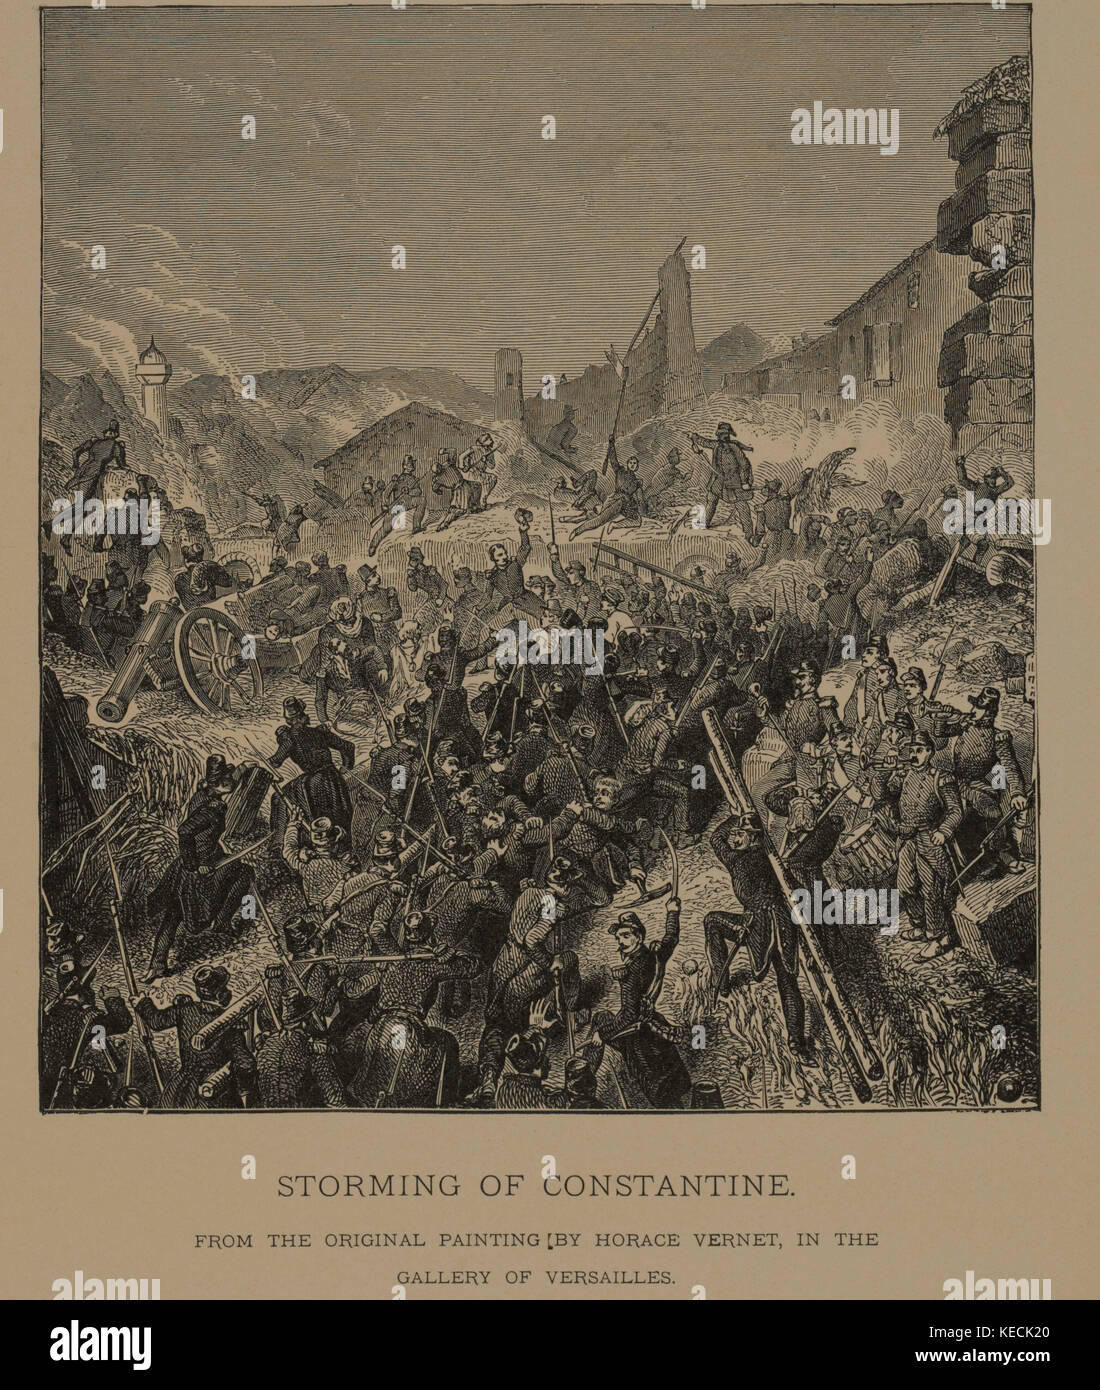 Storming of Constantine, Woodcut Engraving from the Original Painting by Horace Vernet, The Masterpieces of French Art by Louis Viardot, Published by Gravure Goupil et Cie, Paris, 1882, Gebbie & Co., Philadelphia, 1883 Stock Photo